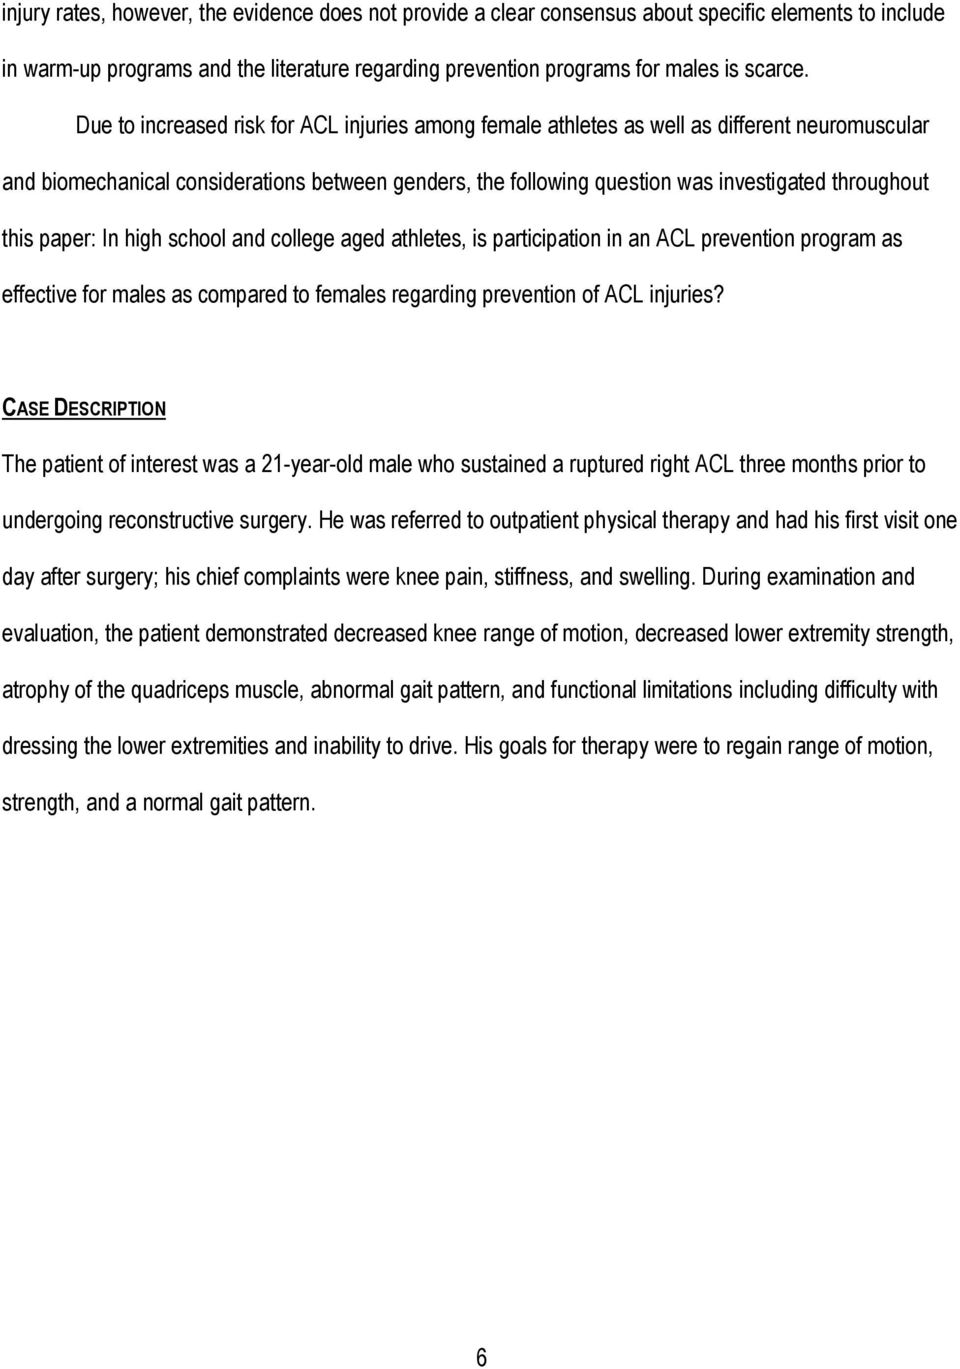 this paper: In high school and college aged athletes, is participation in an ACL prevention program as effective for males as compared to females regarding prevention of ACL injuries?